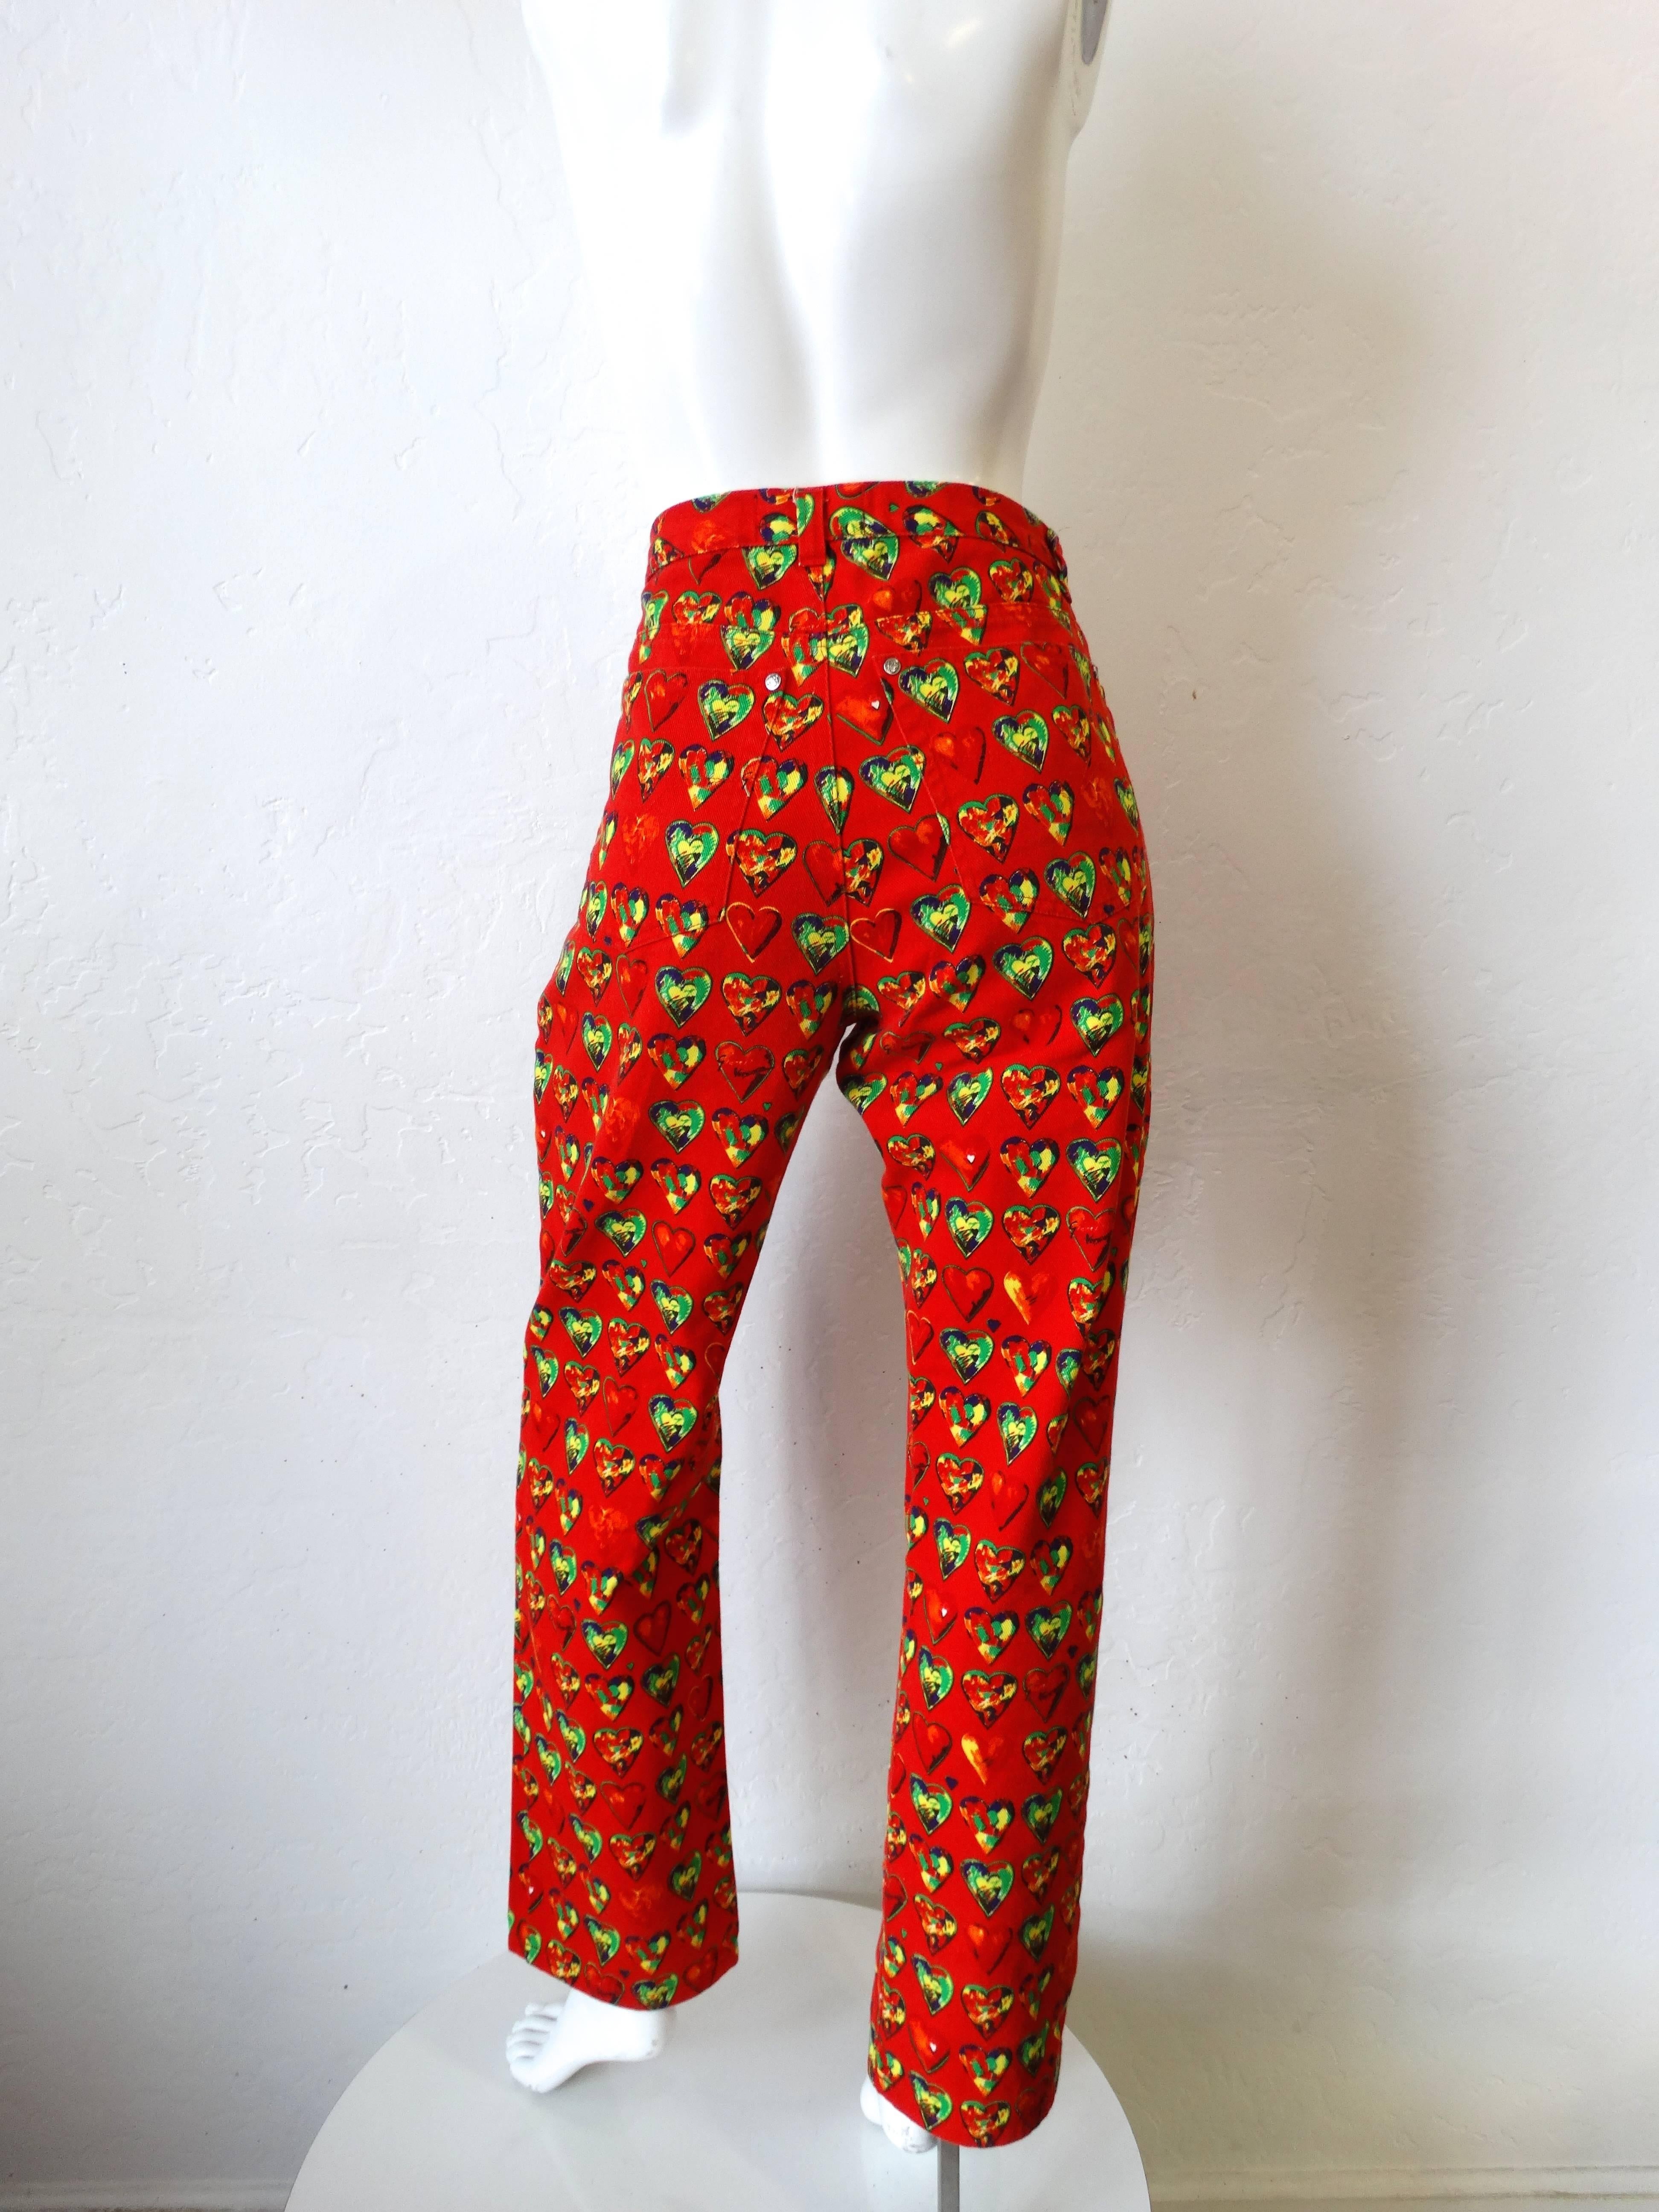 1997 Versace Jeans Heart Printed Pants  In Excellent Condition For Sale In Scottsdale, AZ